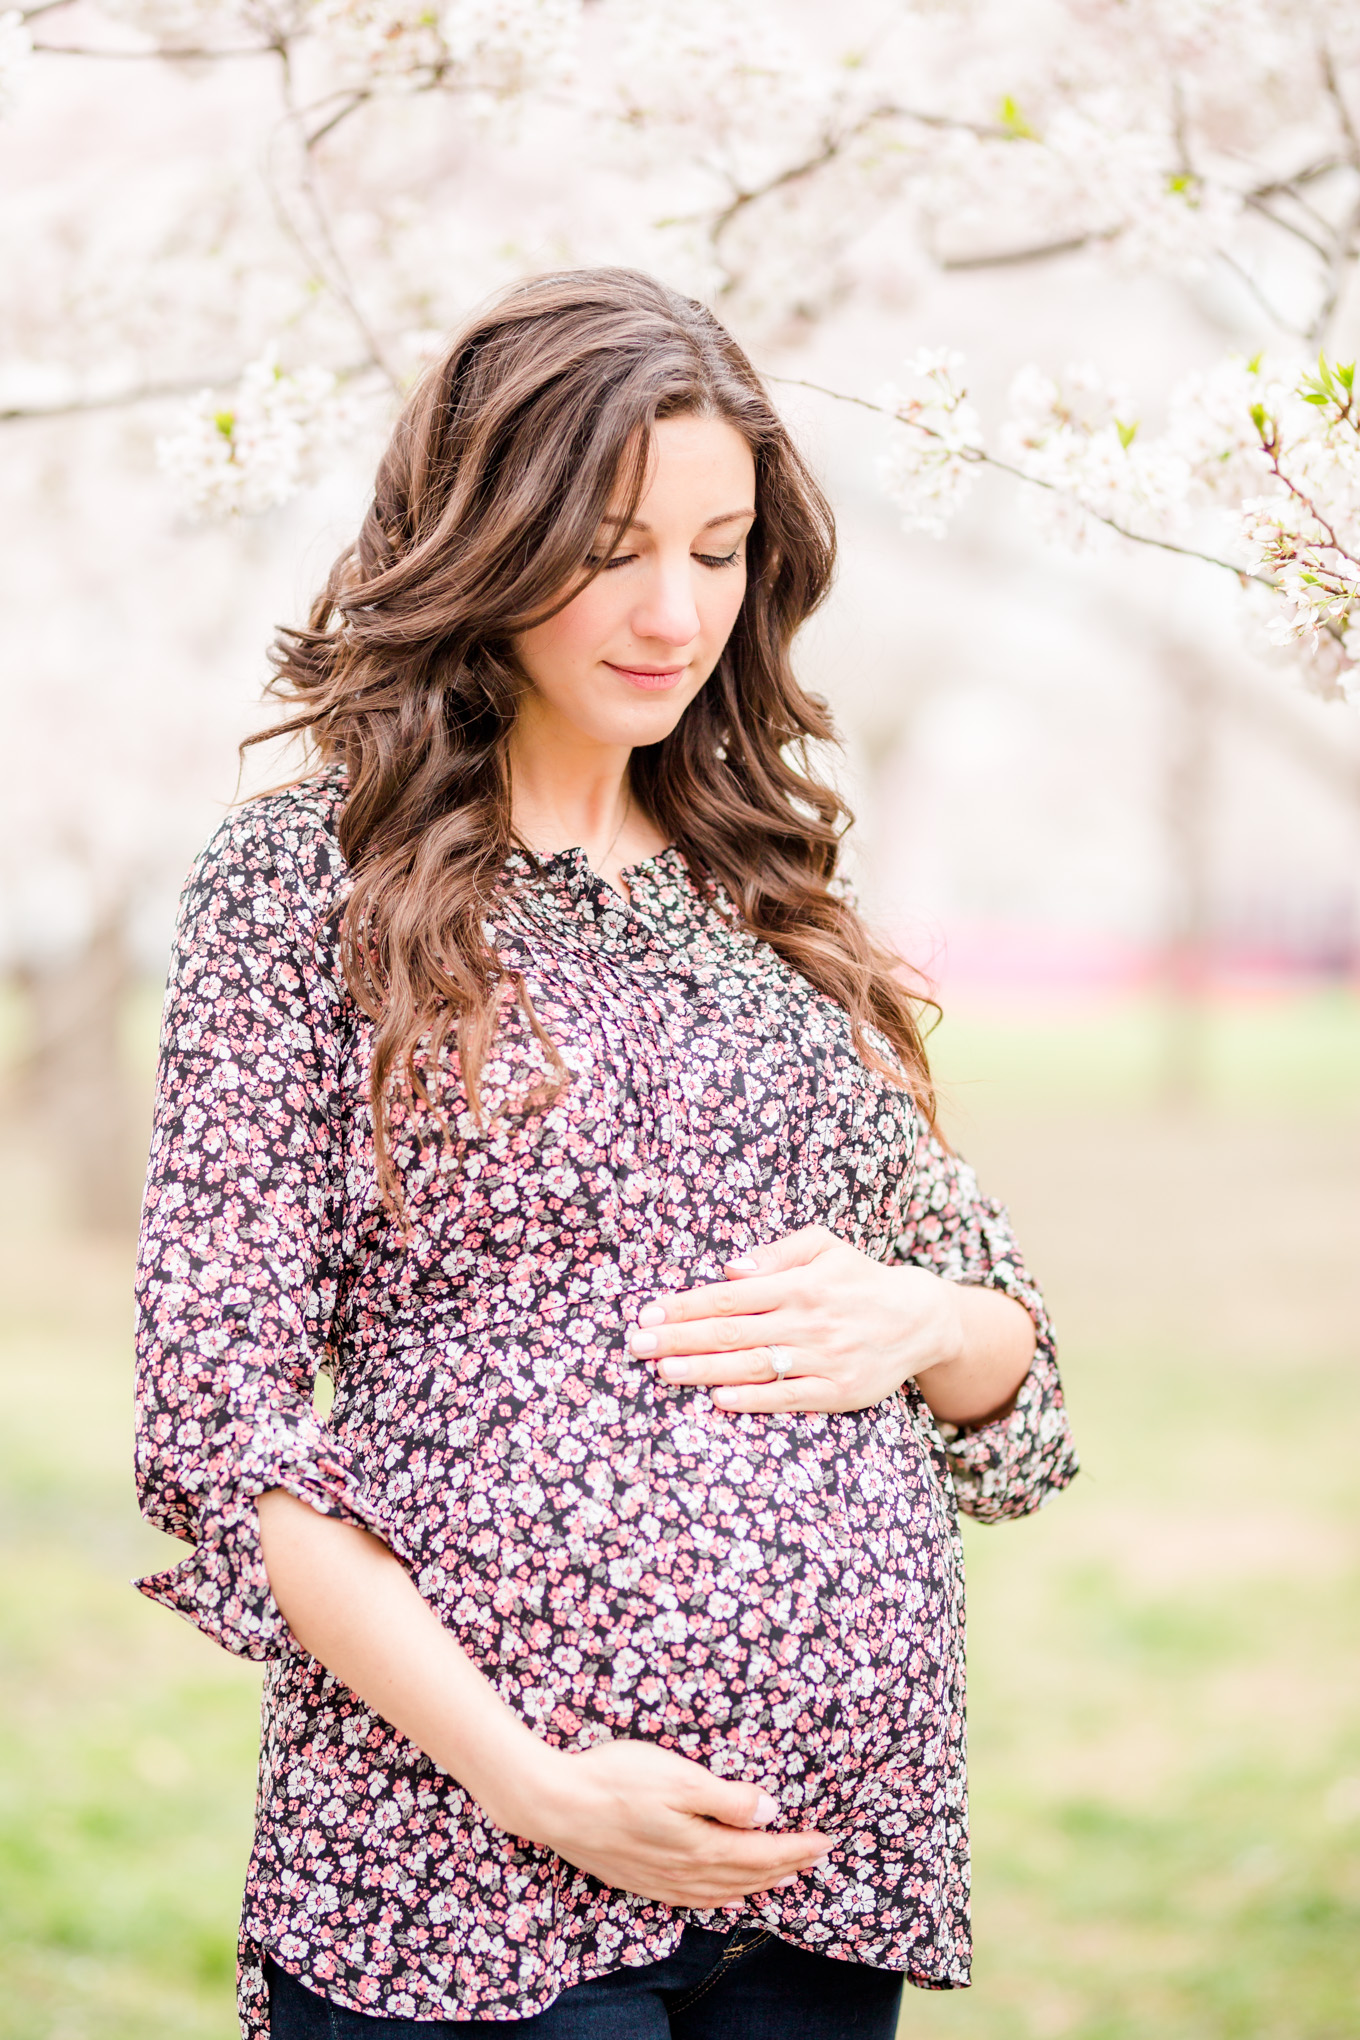 D.C. cherry blossoms maternity session, maternity portraits, maternity photos, D.C. cherry blossoms, cherry blossoms maternity photo, floral print top, brunette expectant mom, expecting mother, brunette woman, pregnant woman, third trimester, baby bump, cherry blossoms forest